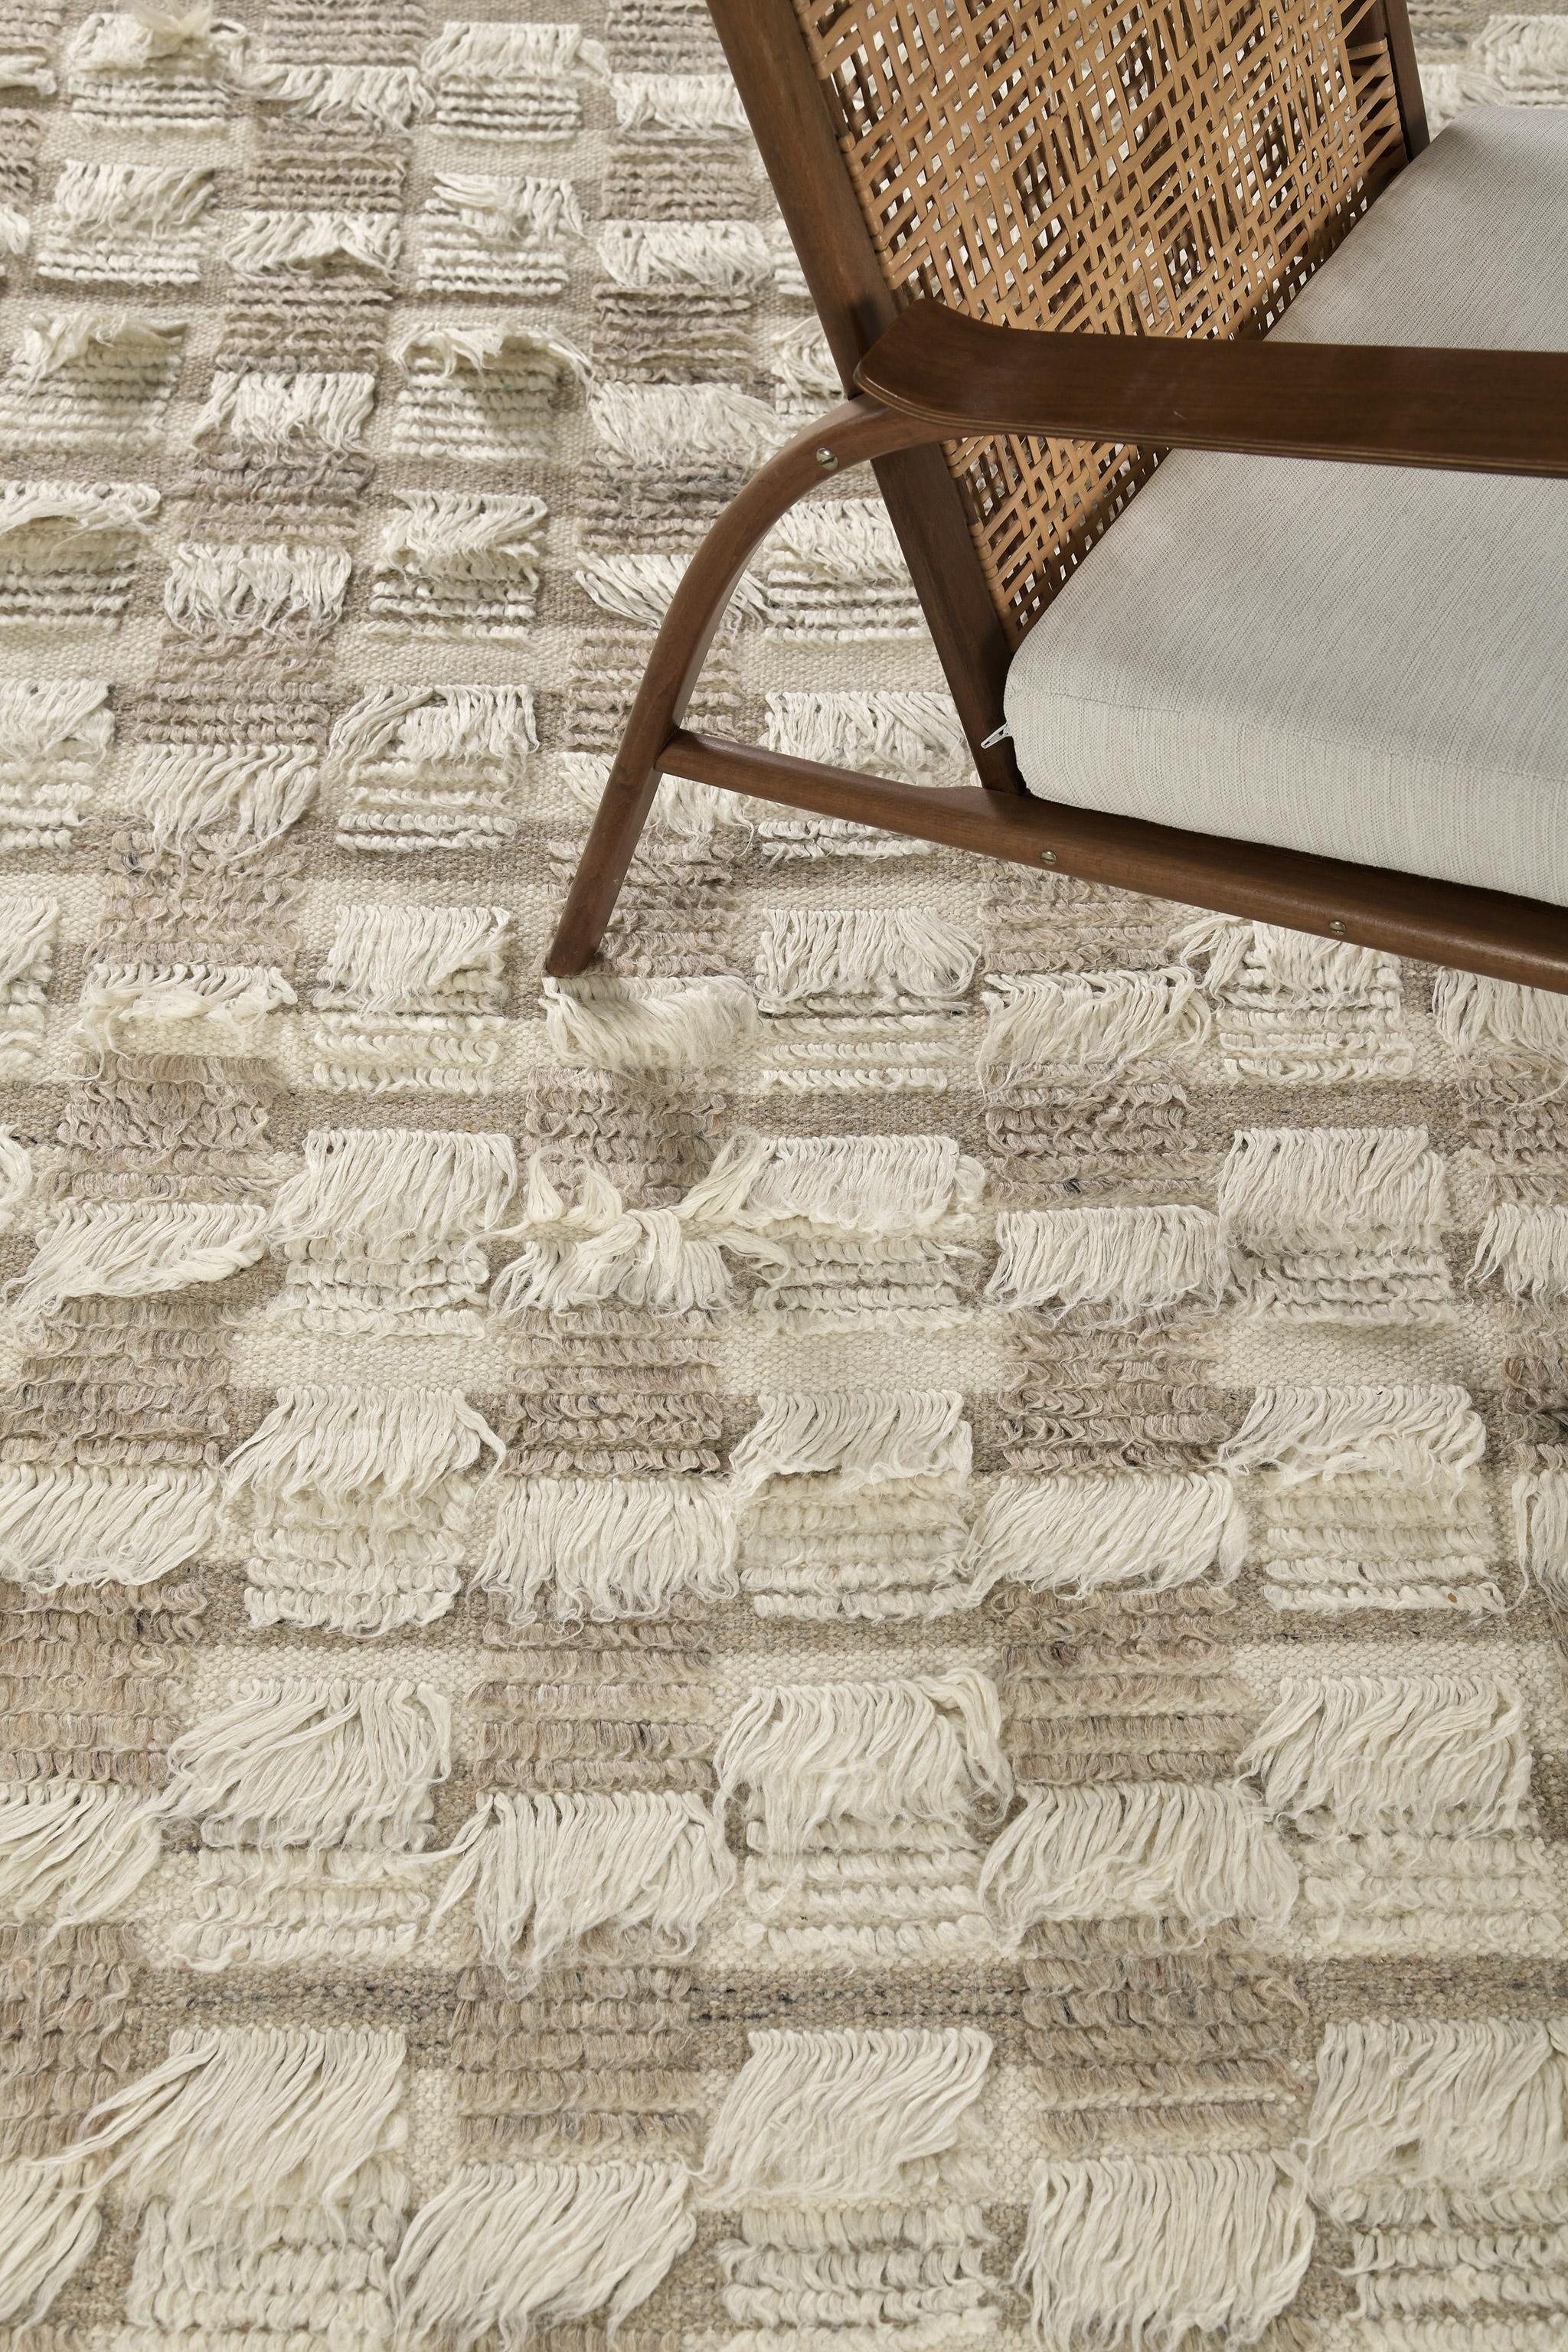 The Amia rug interlaces horizontal stripe patterns of alternating pile heights, with openings of flatweave bands. This bright neutral colorway combines ivory and wheat tones.

An extension of Mehraban’s popular Amihan design, the Sahara Collection